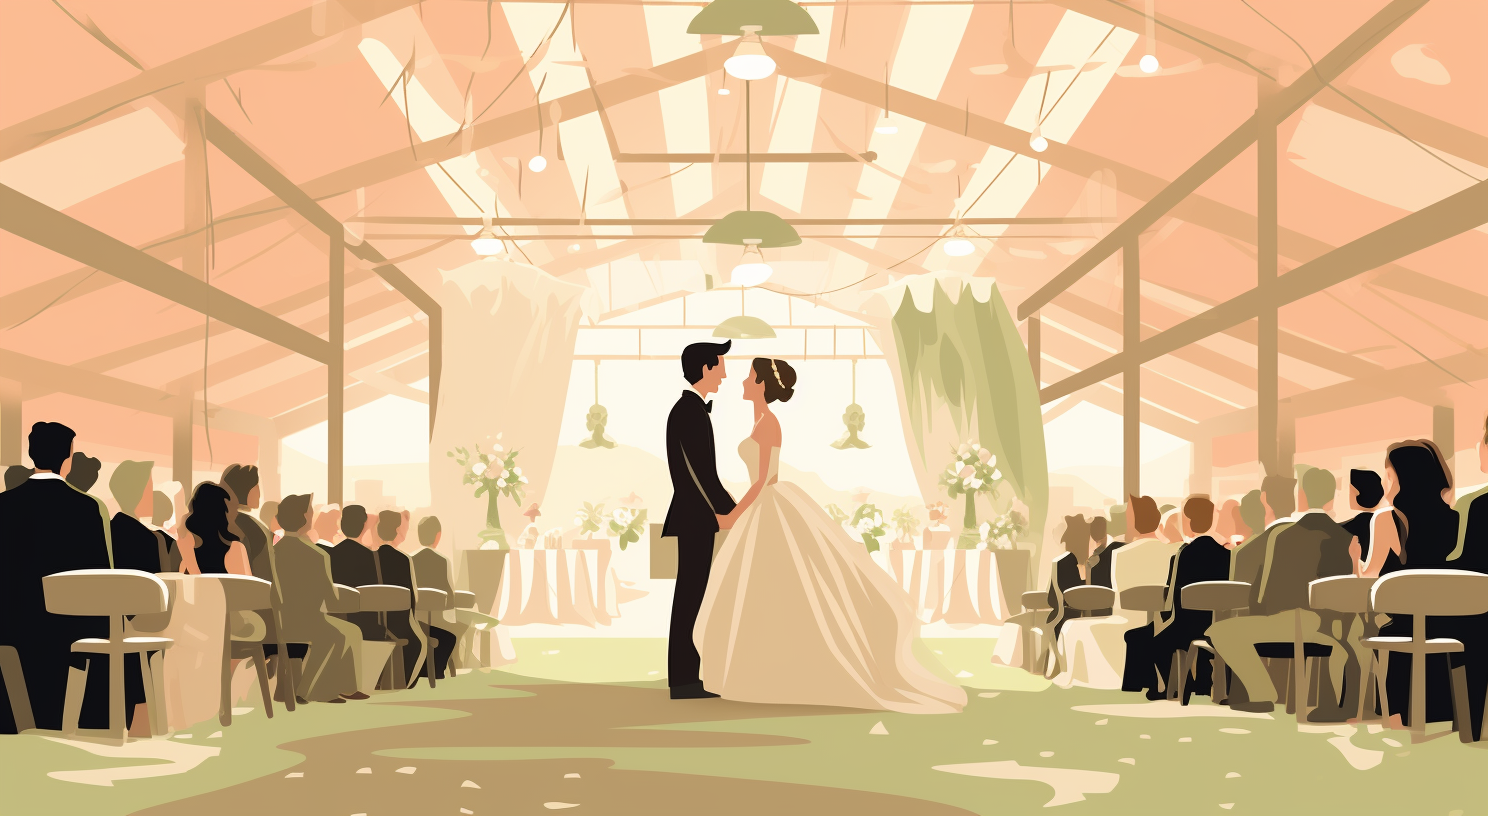 A bride and groom getting married in a barn.